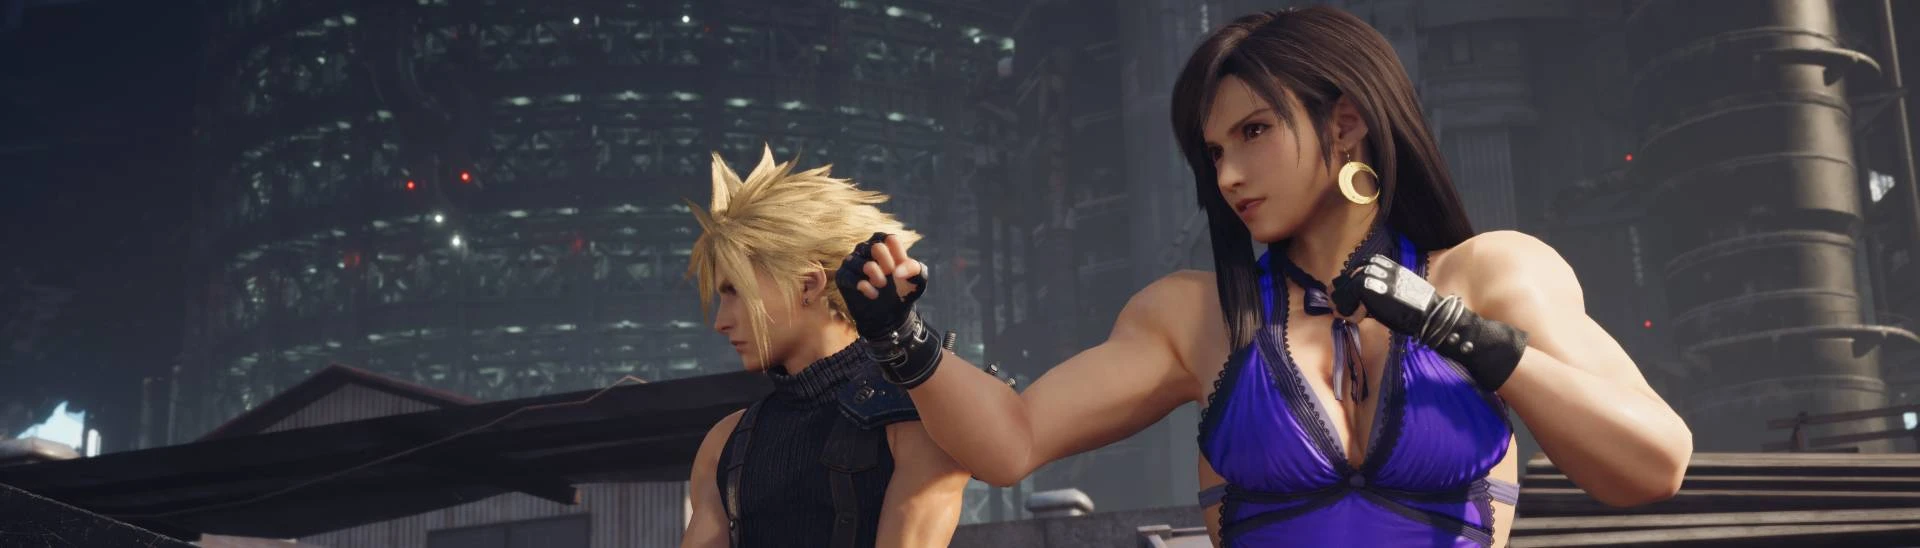 Final Fantasy 7 Remake mod puts Cloud in a dress for the whole